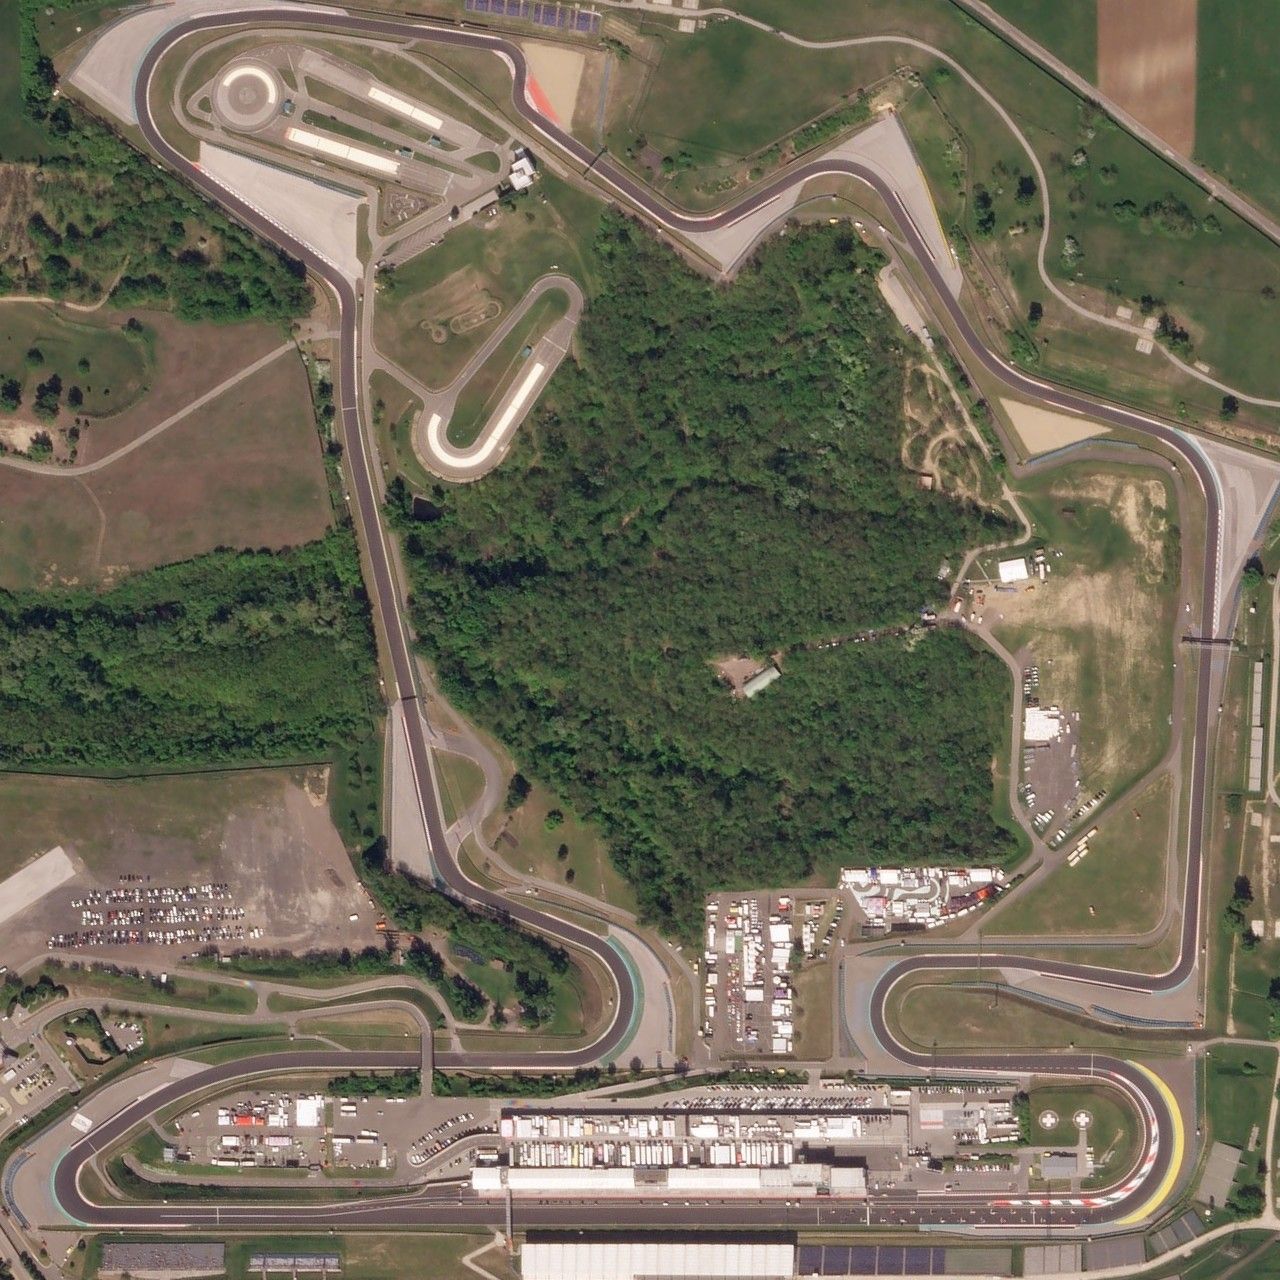 The Hungaroring. By Planet Labs, Inc. - https://medium.com/planet-stories/a-grand-prix-world-tour-86b08d45ae46, CC BY-SA 4.0, https://commons.wikimedia.org/w/index.php?curid=76972129